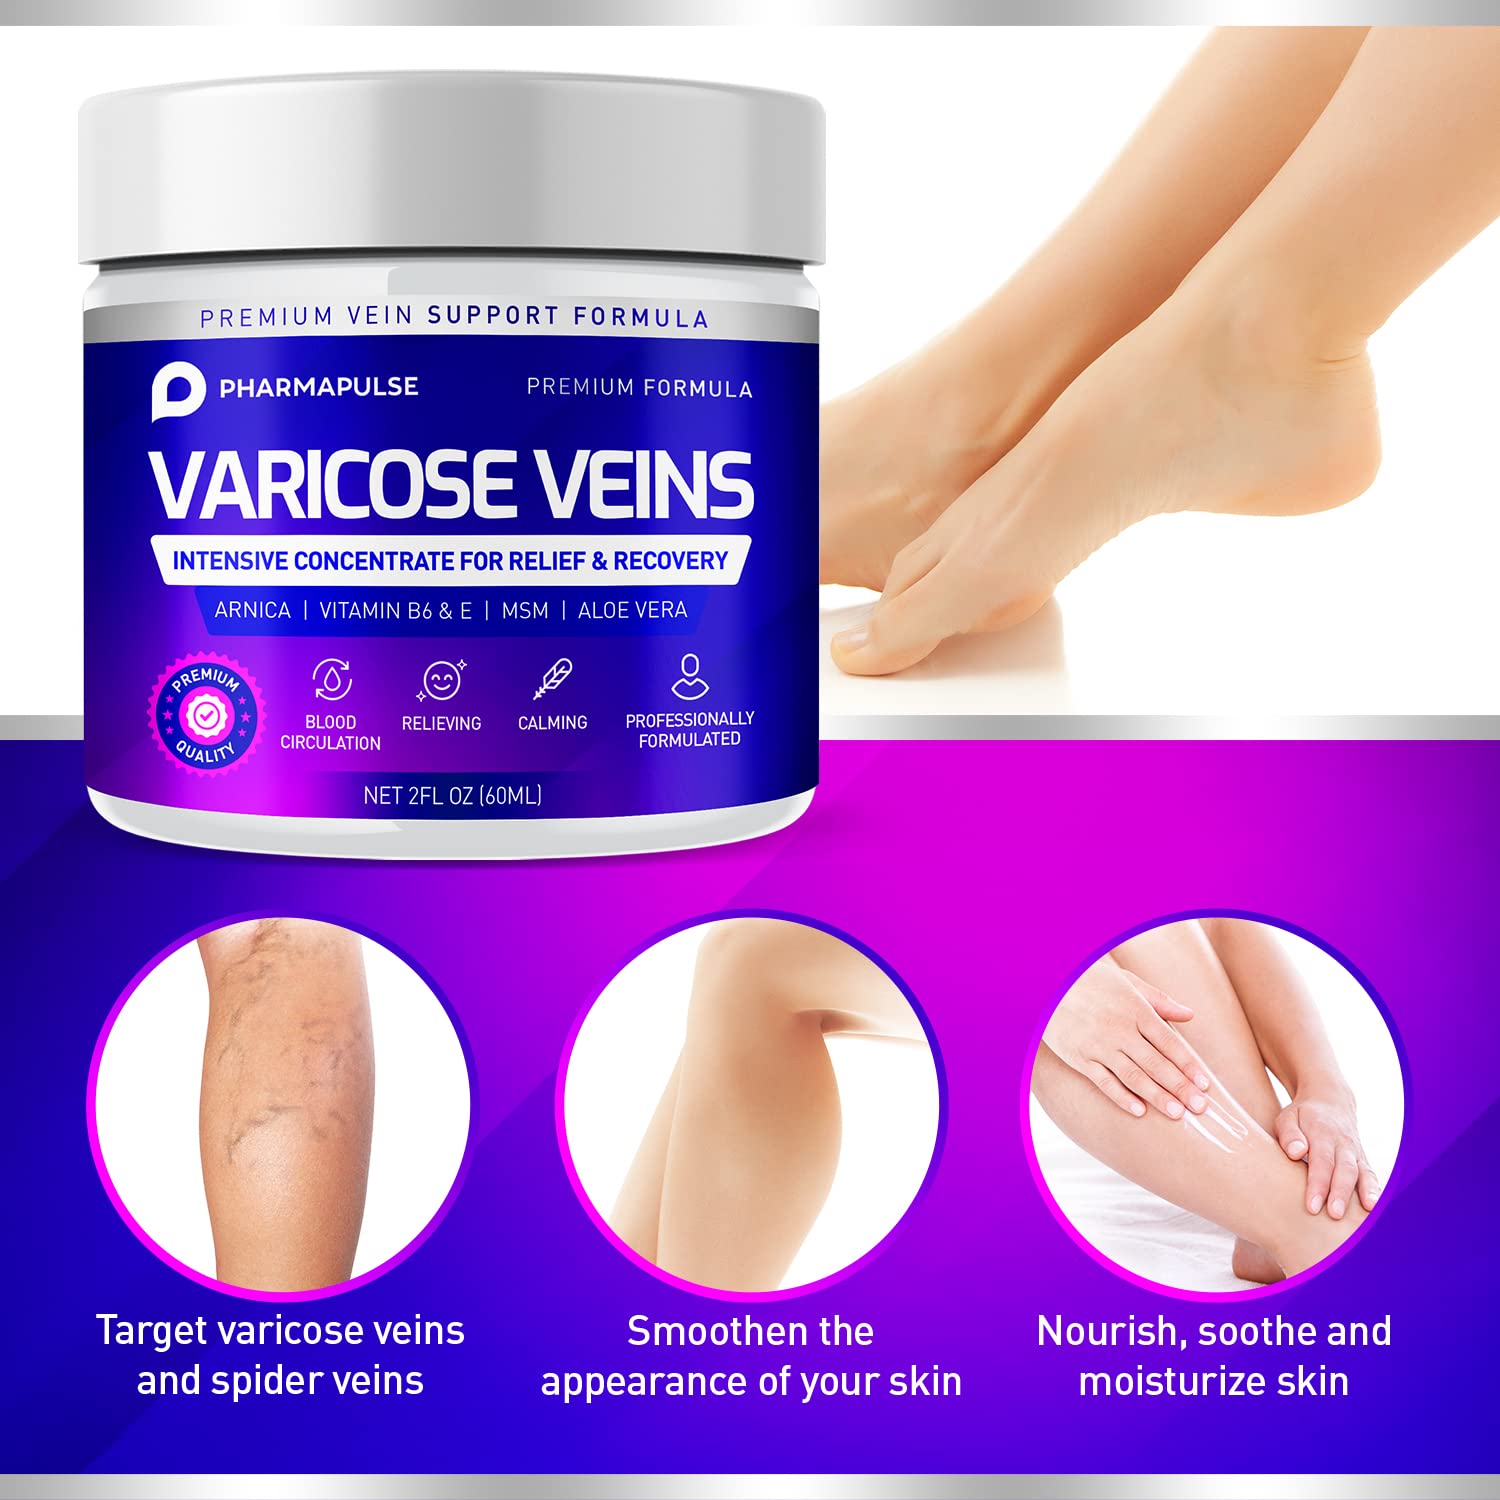 How to Eliminate Varicose Veins and Cellulite on Legs: 10 Natural Remedies